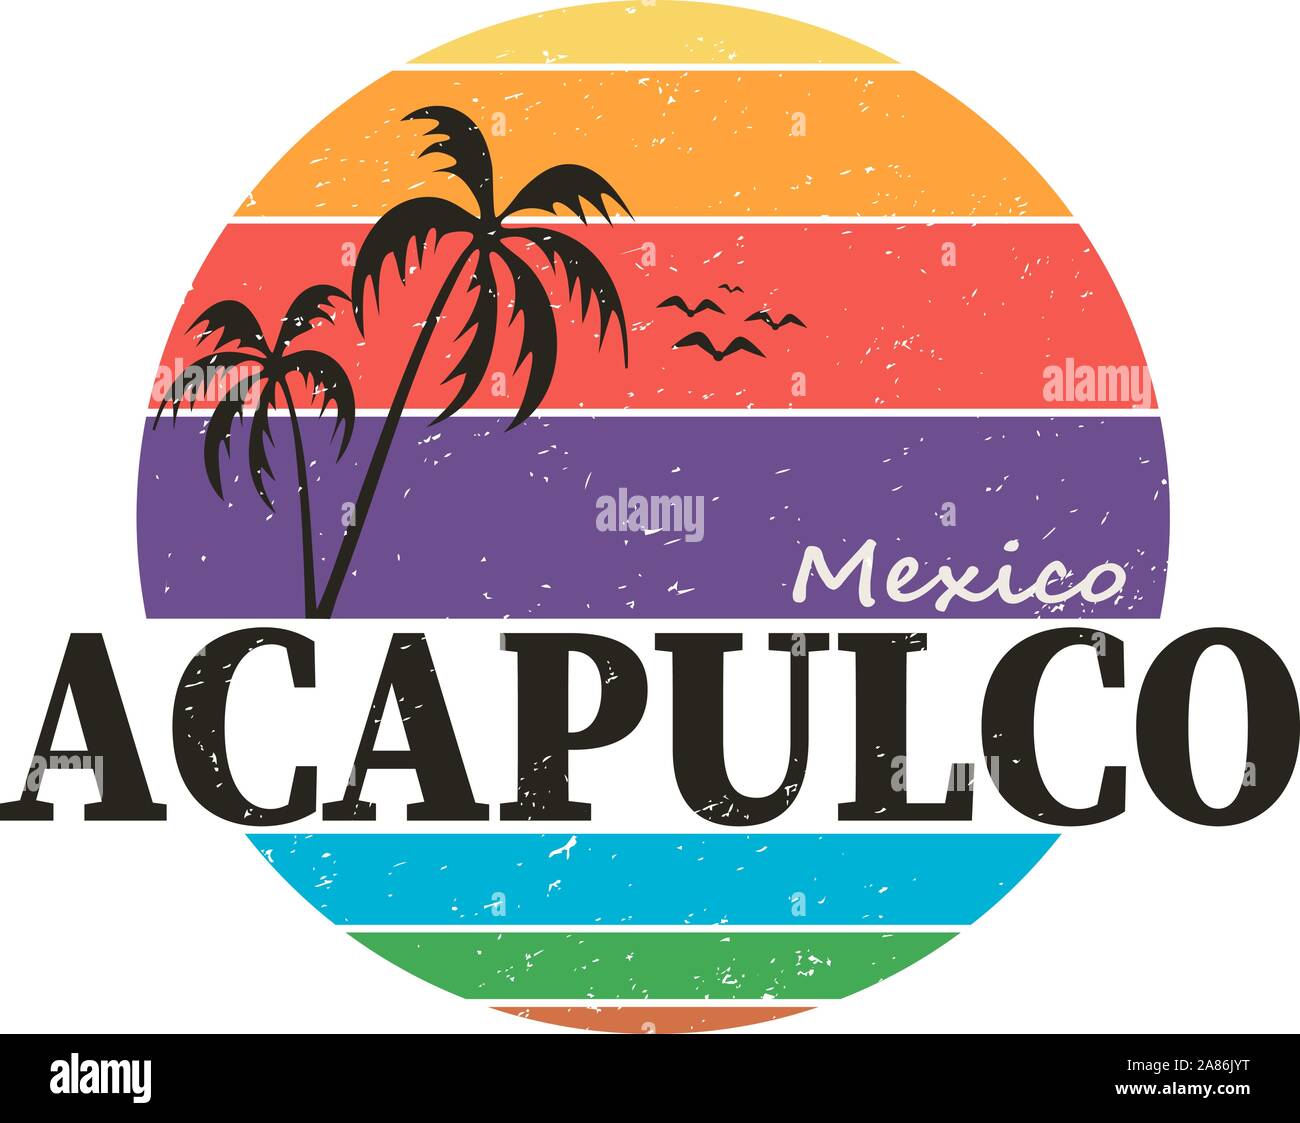 Acapulco Mexico - round vector icon, emblem design on a white background Stock Vector